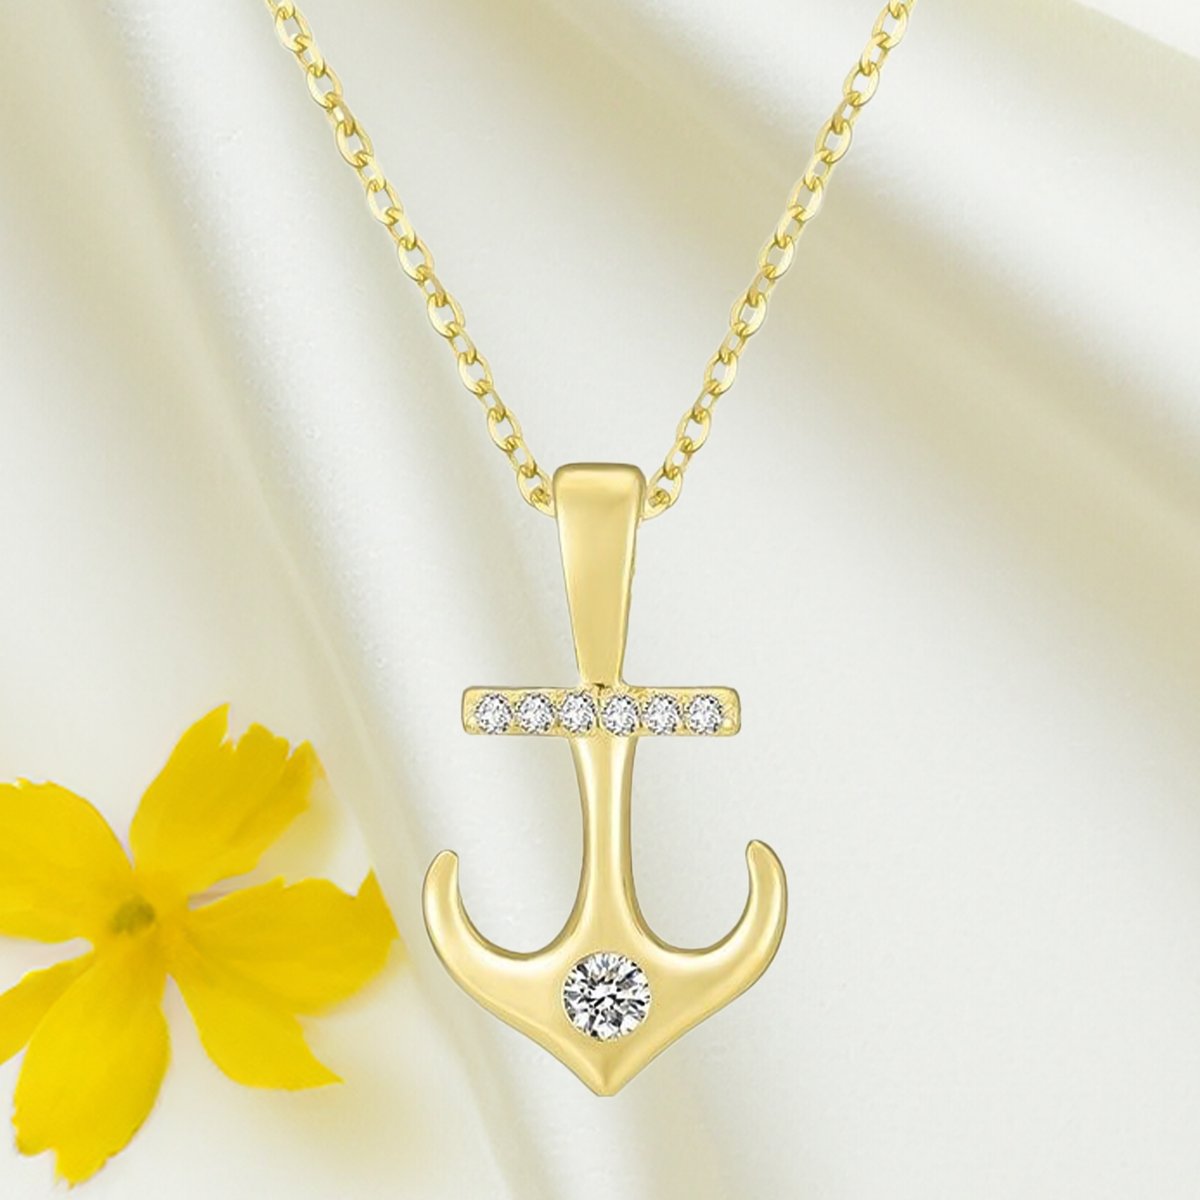 ⚓️ Gold plated 925 Sterling Silver Anchor Necklace With Clear Cubic Zirconia

Code 588 >> bit.ly/3ftGzOH

#besttohave #besttohavejewelry #gold #goldtones #goldnecklace #goldplated #necklace #lovejewelry #jewelry #jewellery #outfitinspiration #outfitoftheday